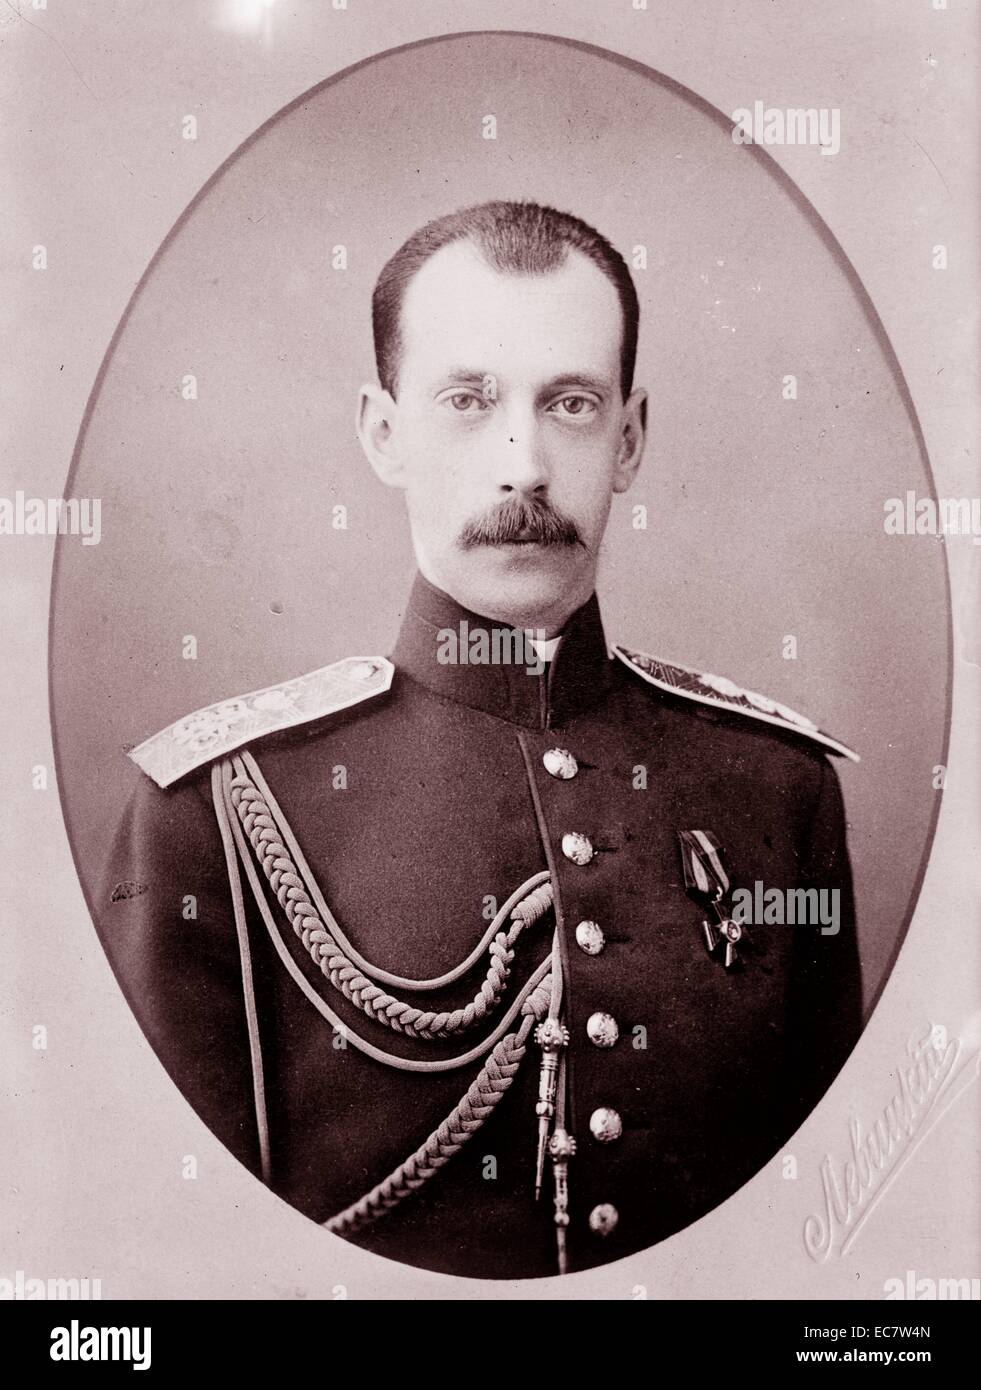 Grand Duke Paul Alexandrovich of Russia ( 3 October 1860 – 30 January 1919) was the eighth child of Tsar Alexander II of Russia by his first wife Empress Maria Alexandrovna. His birth was commemorated by the naming of the city of Pavlodar in Kazakhstan. He entered the Russian Army and rose to the rank of General, but was known as a gentle person, religious and accessible to people. Stock Photo